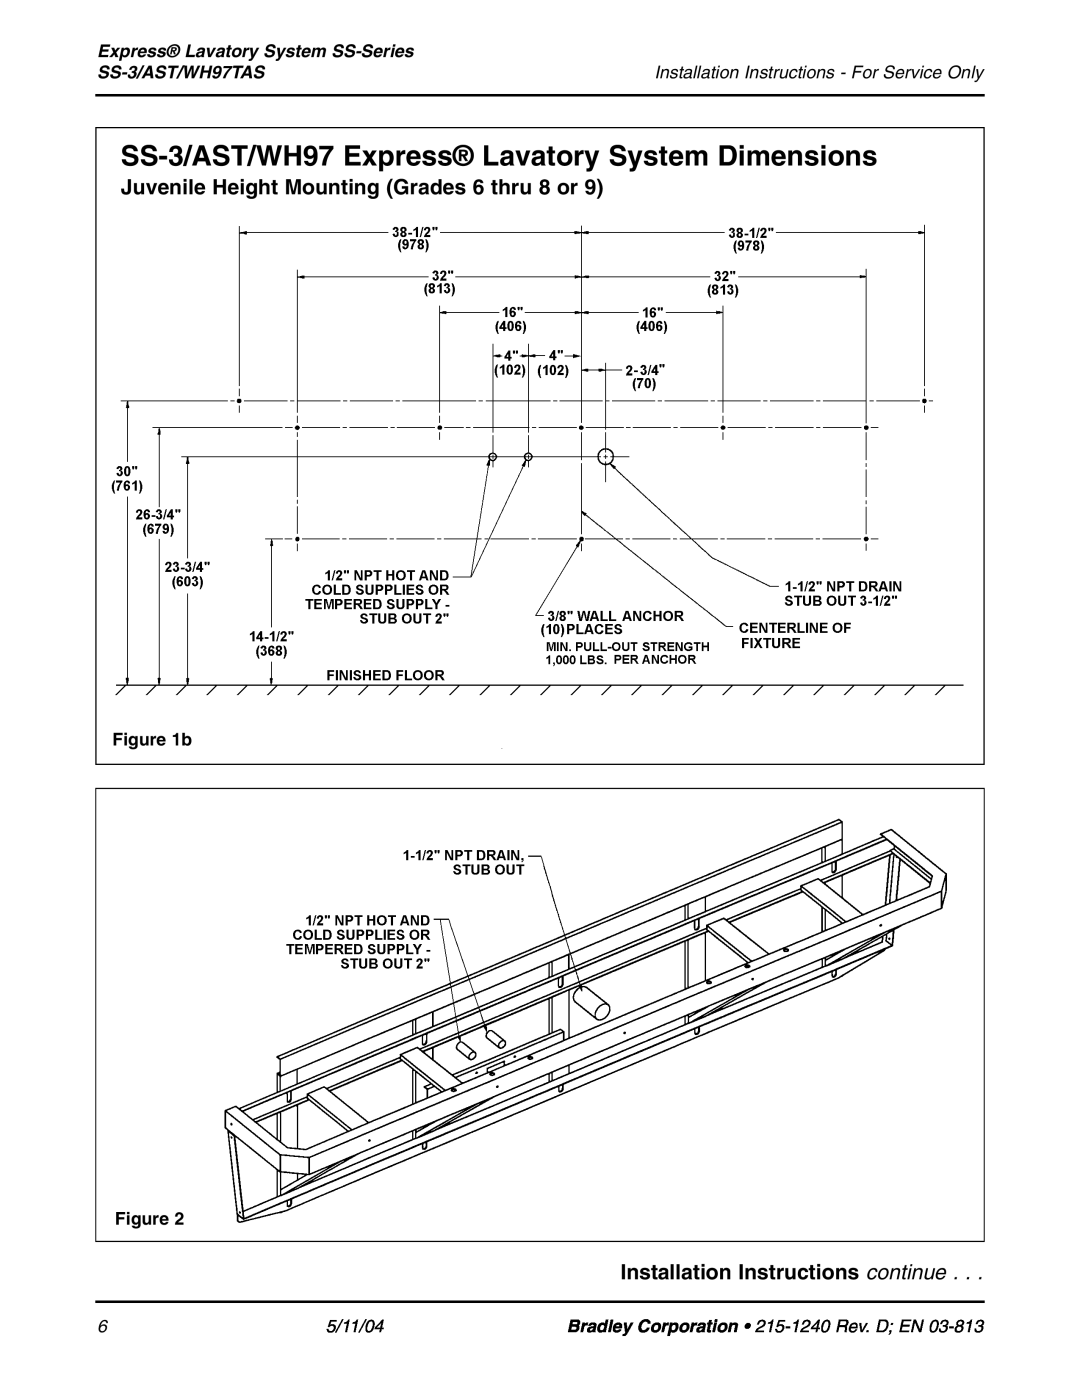 Bradley Smoker Juvenile Height Mounting Grades 6 thru 8 or, SS-3/AST/WH97 Express Lavatory System Dimensions, b 